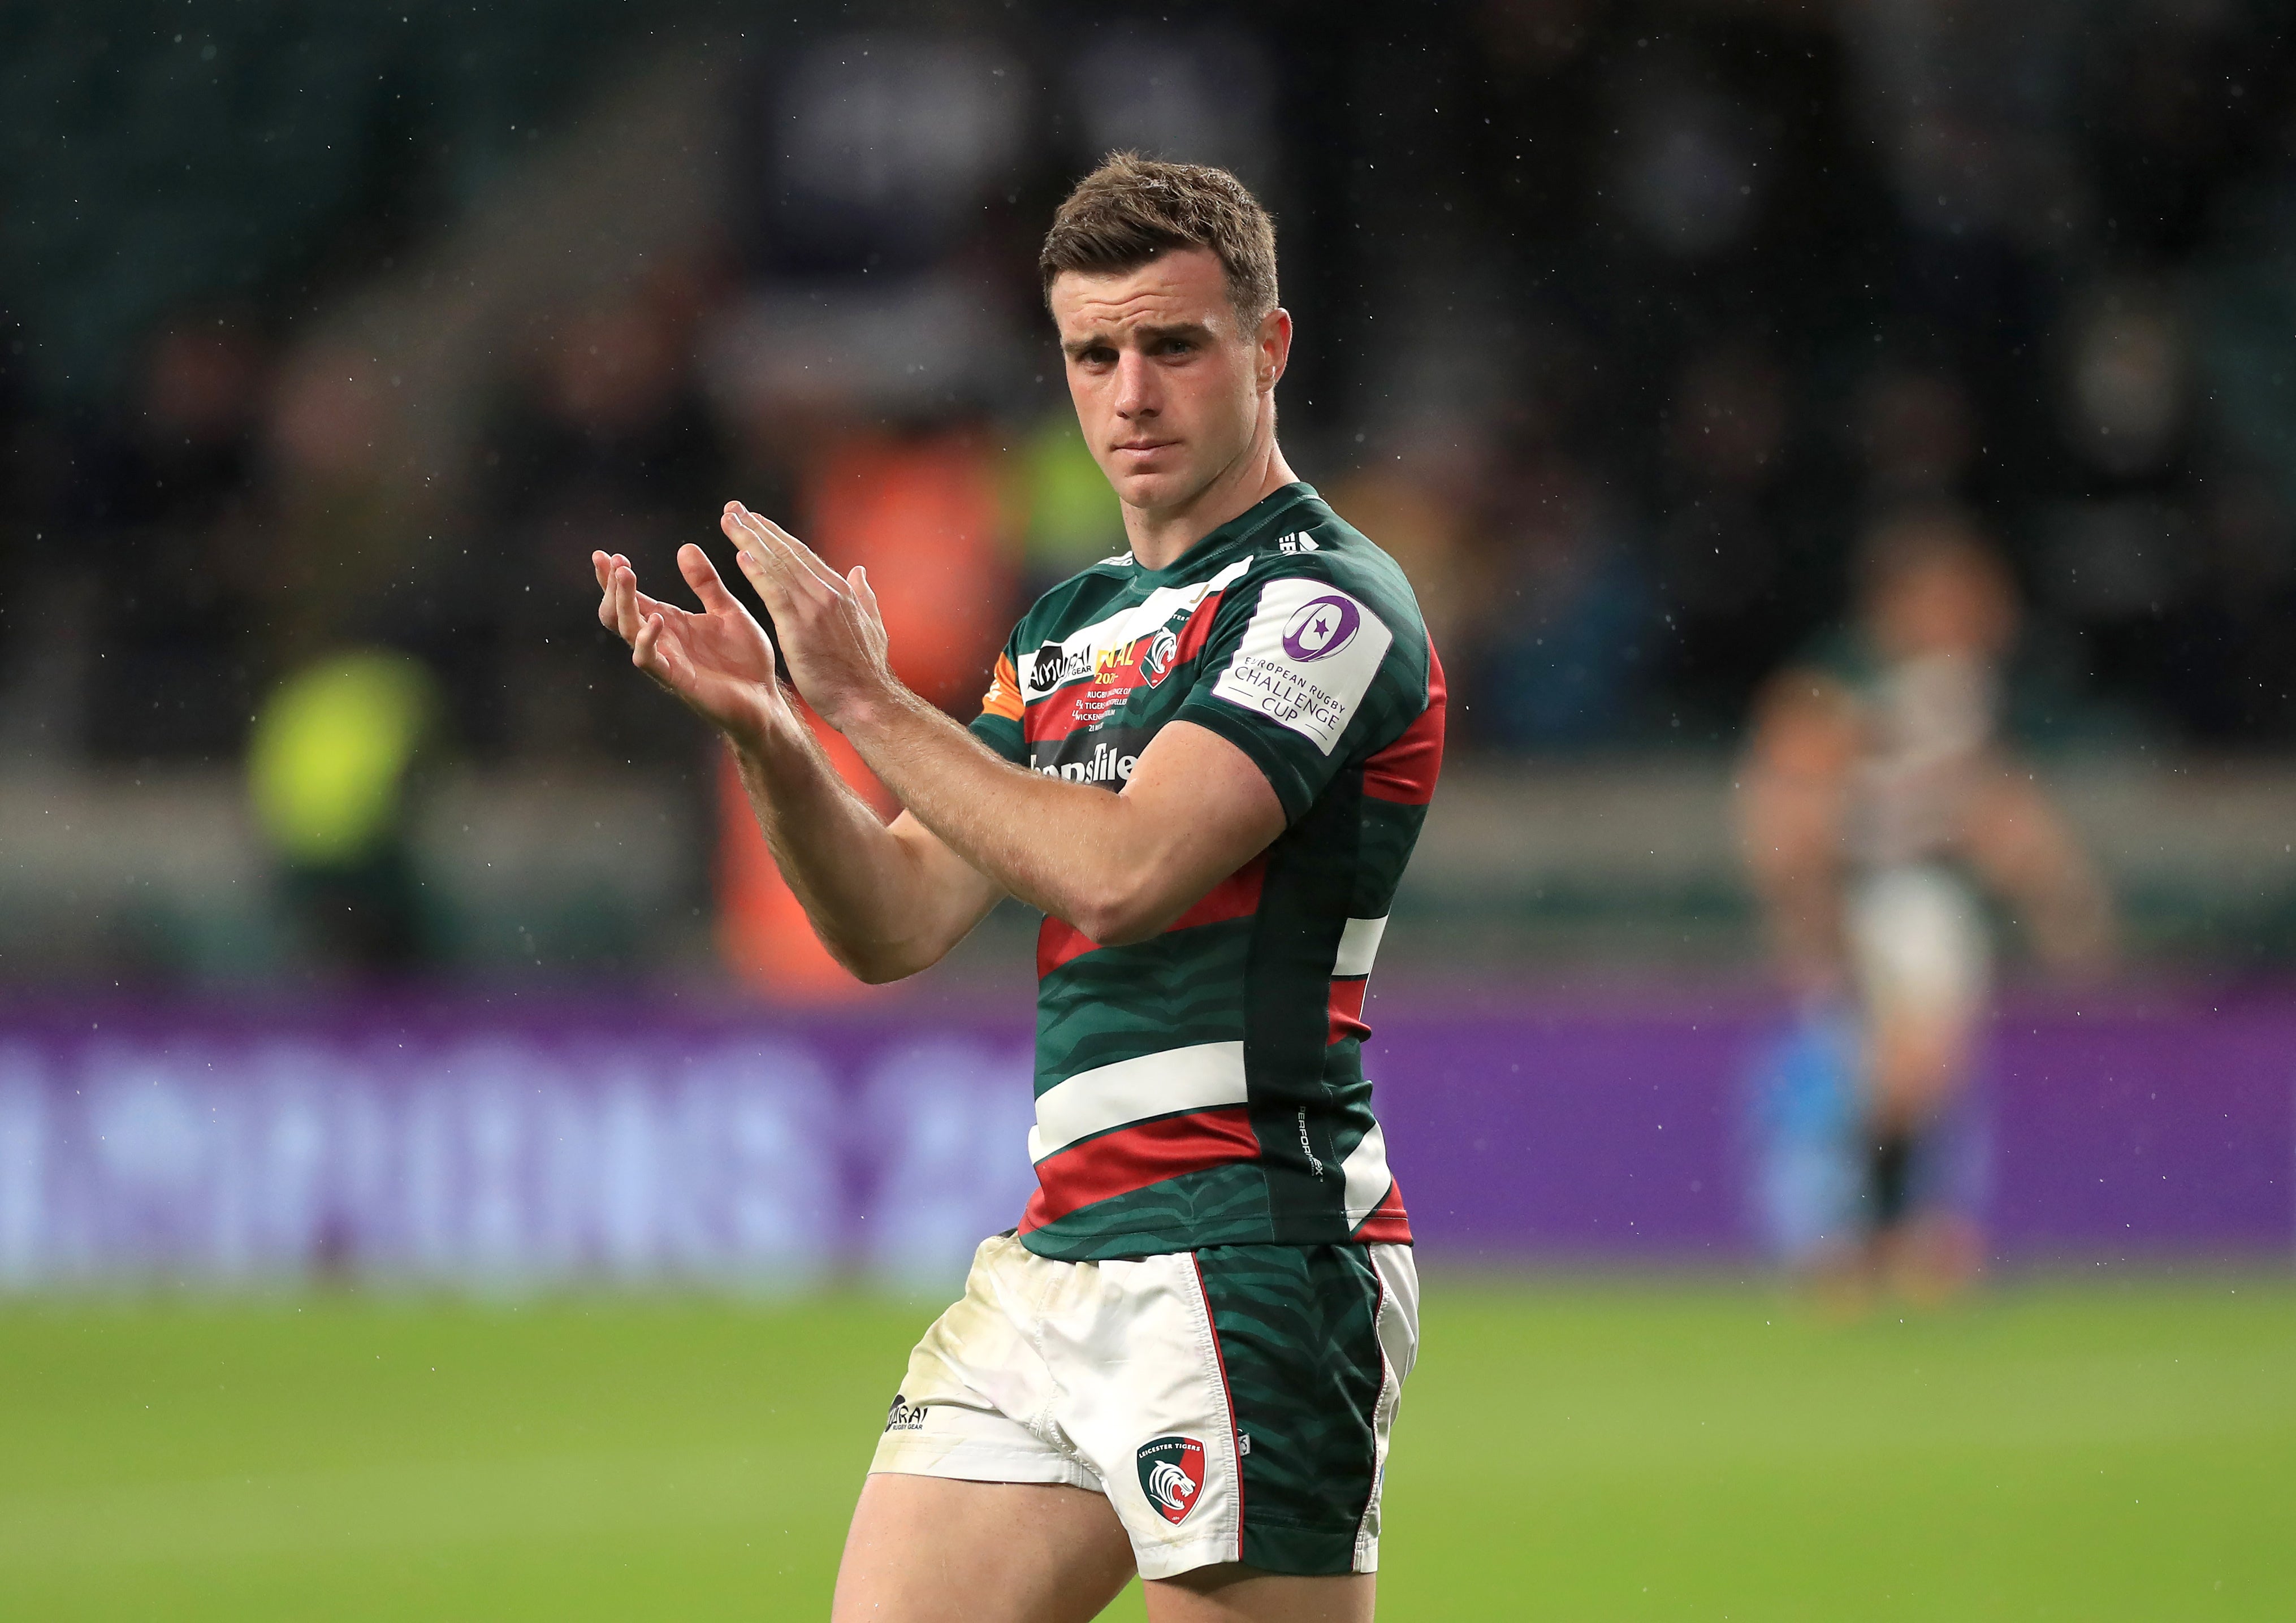 George Ford has been called into England’s training squad for the Six Nations